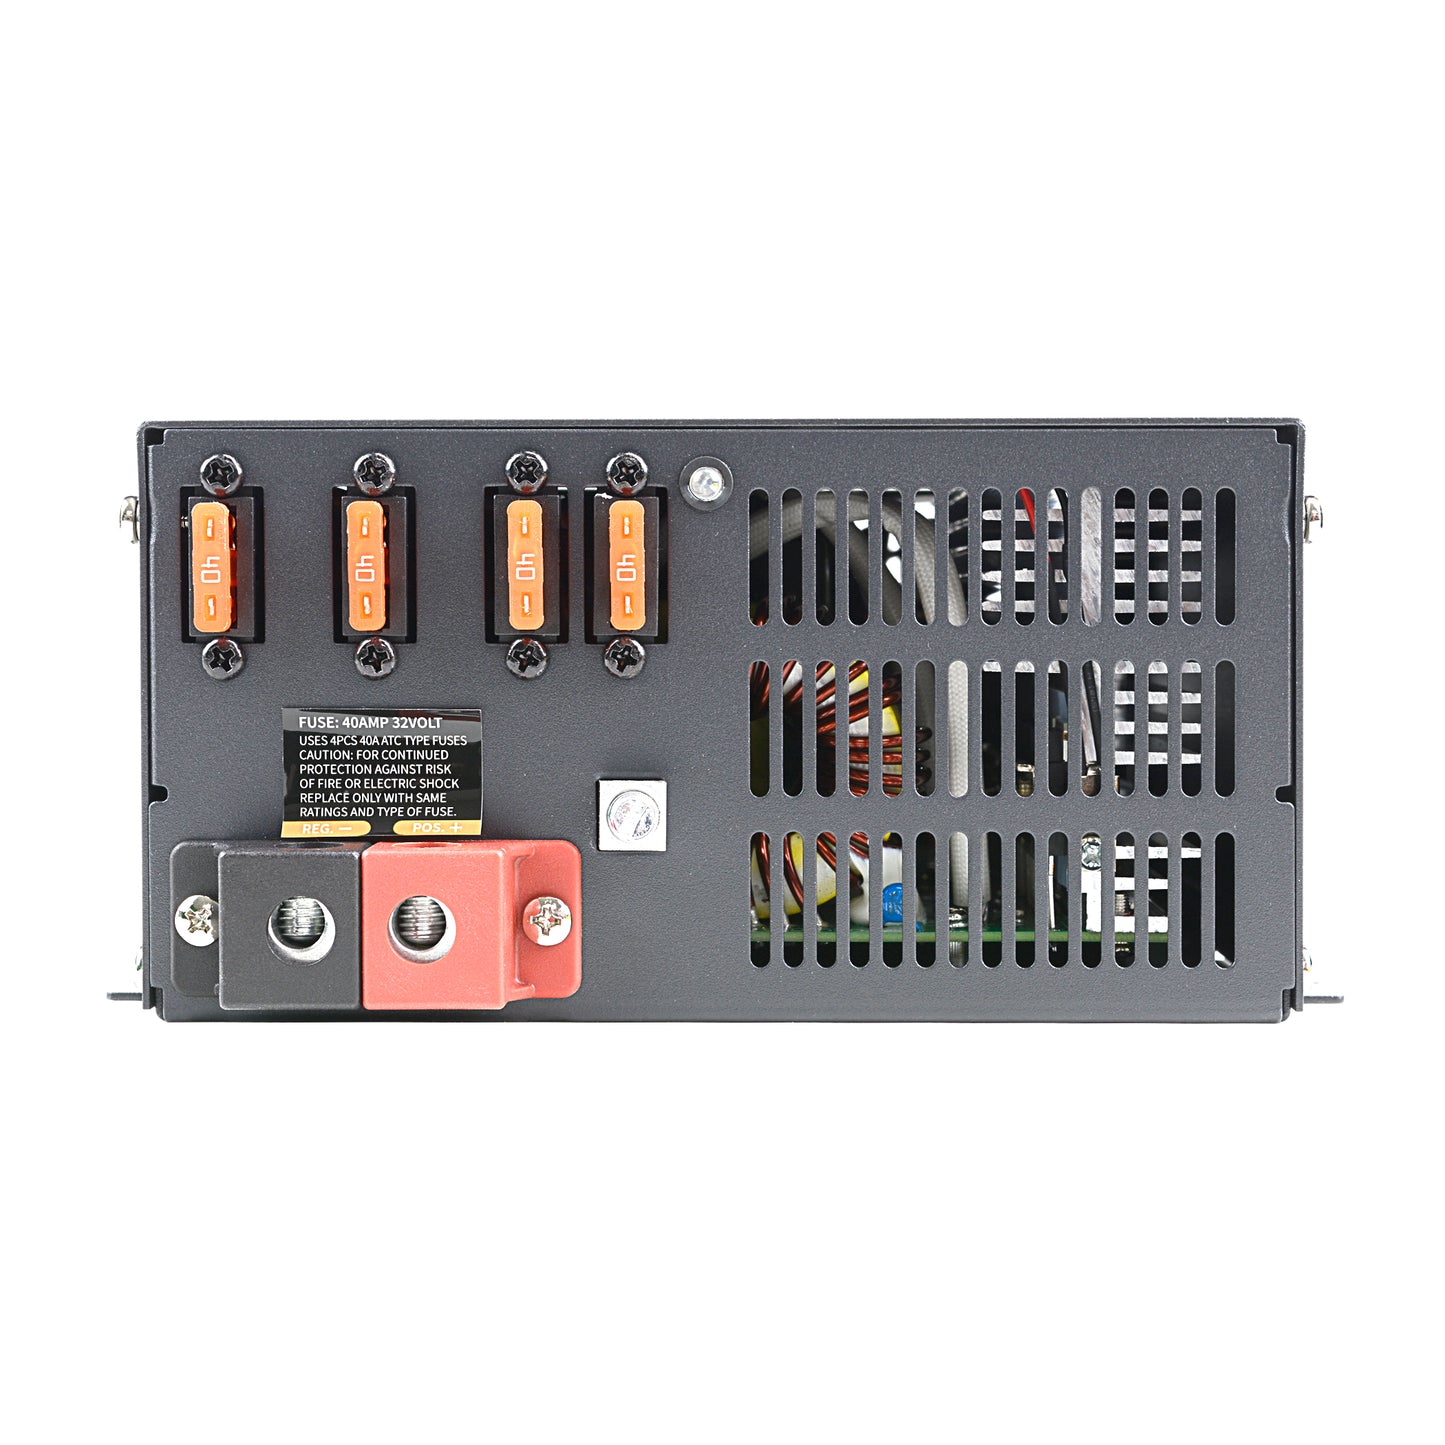 100A AC to DC Power Supply (IS-DPCH-13100)